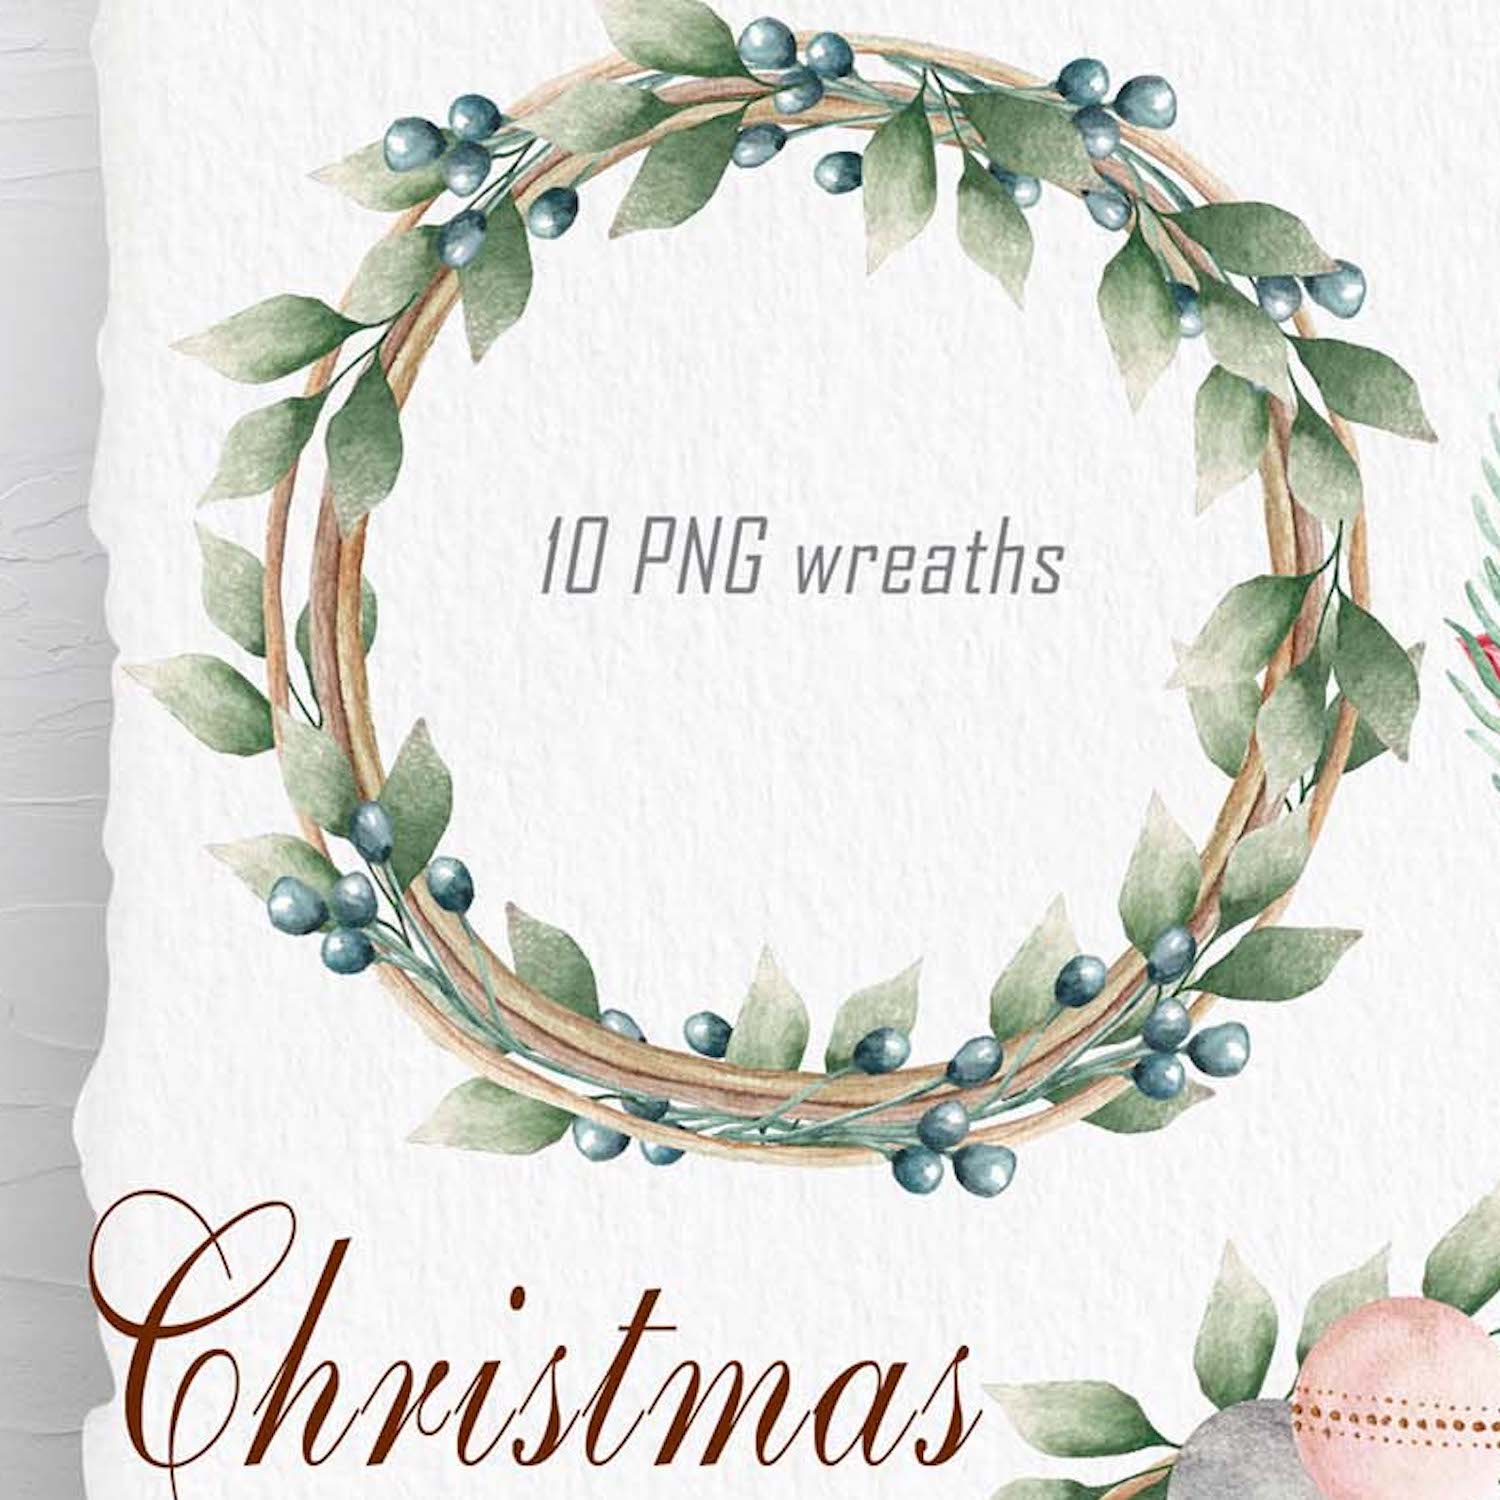 Watercolor Christmas Wreaths cover image.